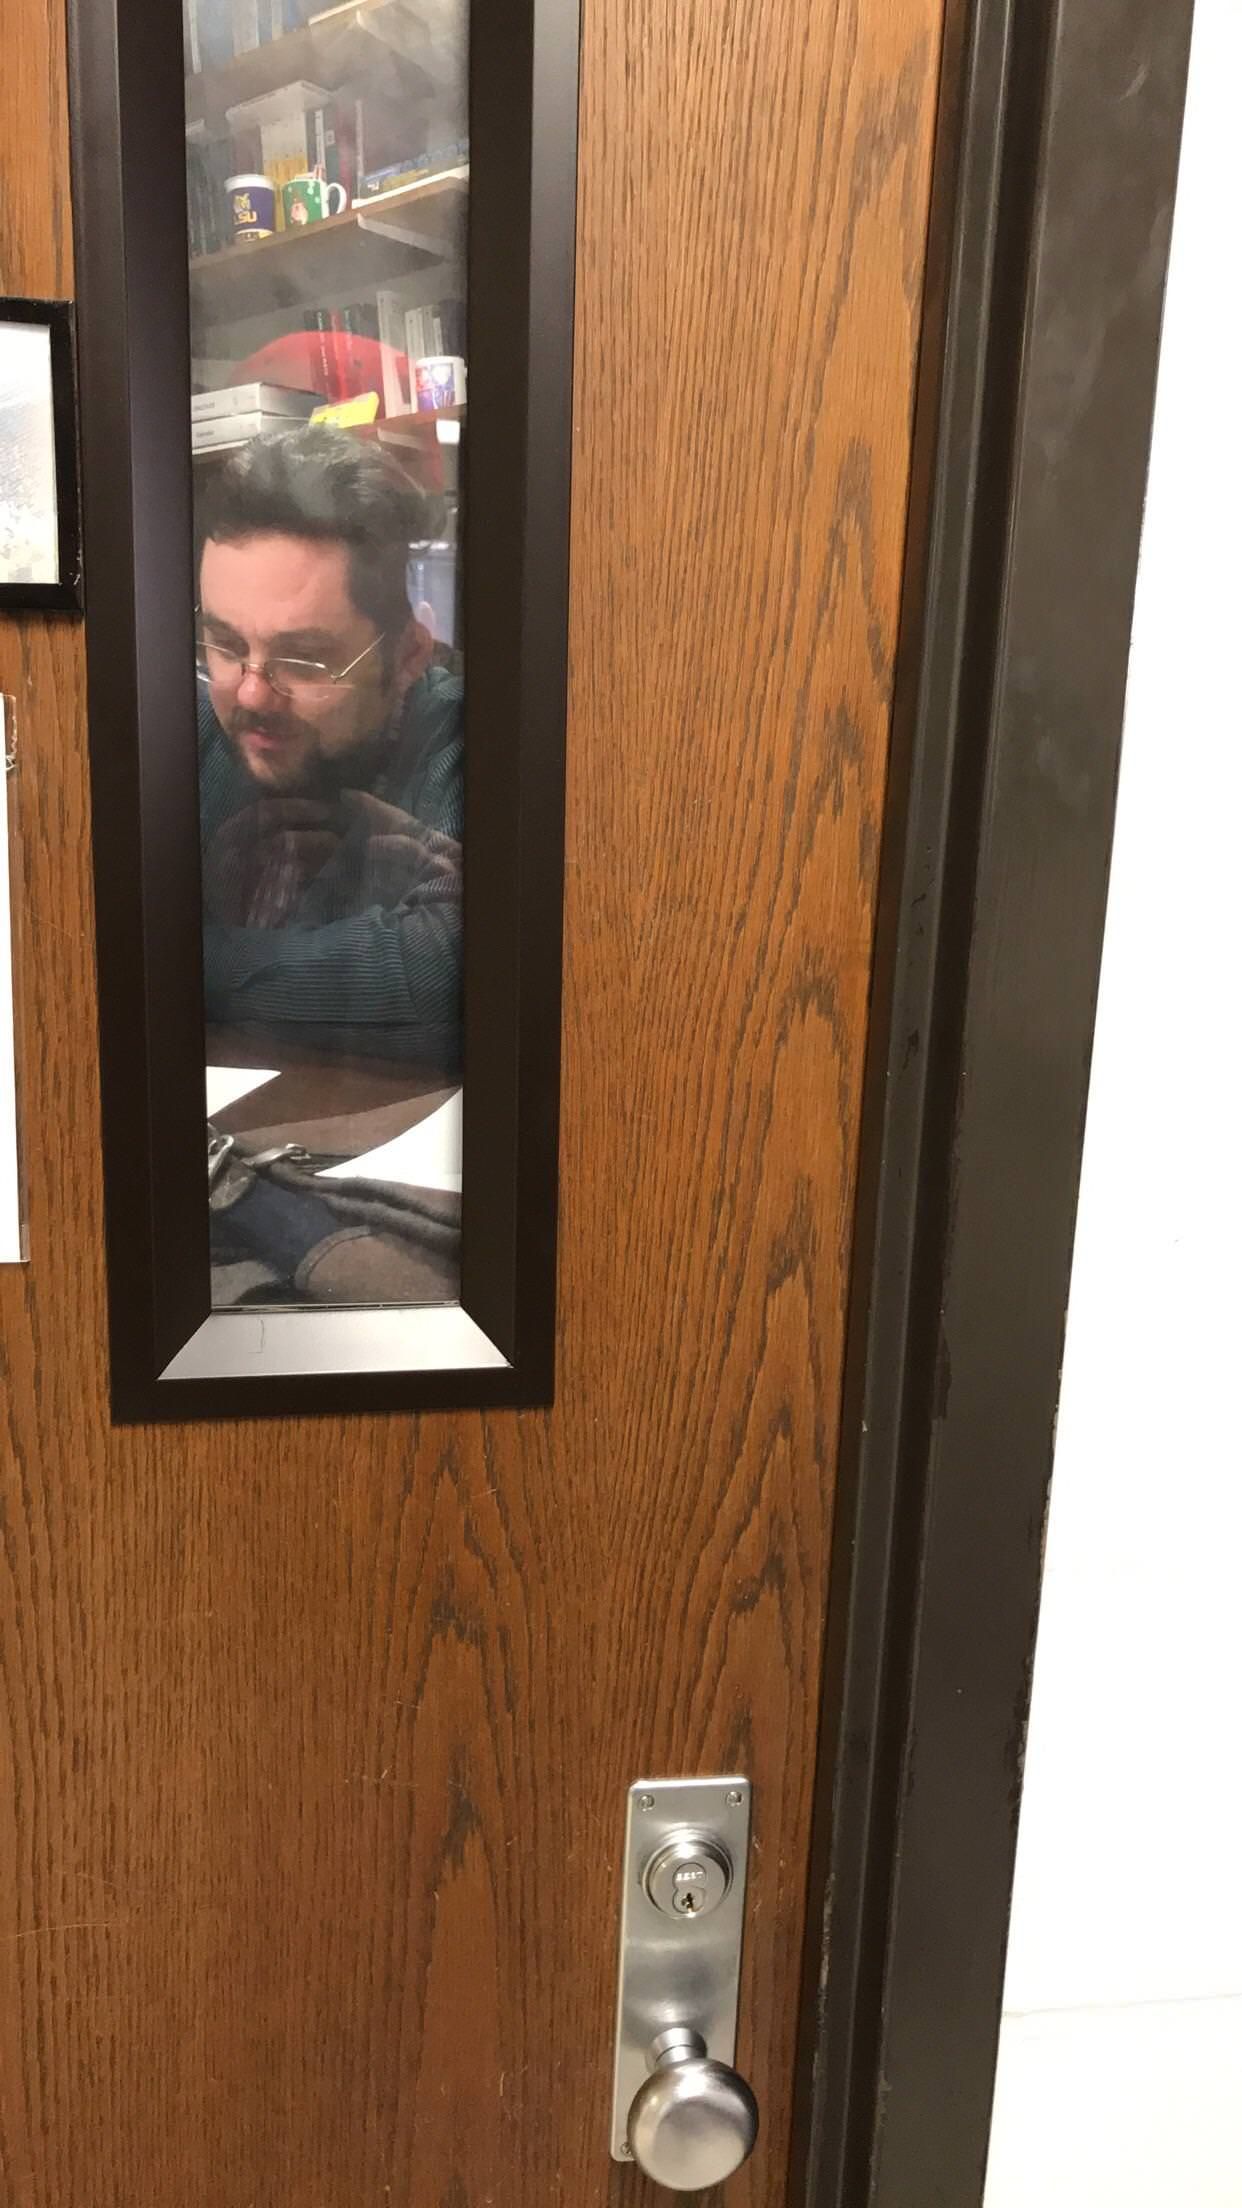 Teacher put up a picture of himself on his door so it looks like he’s always in his office.